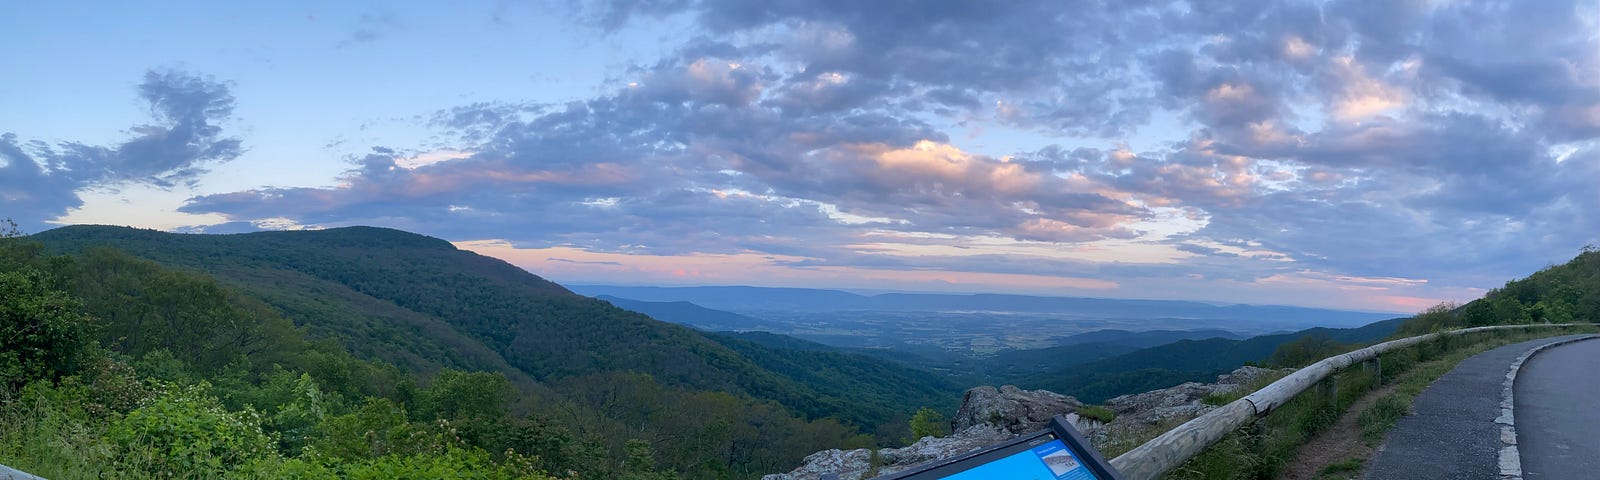 Scenic view at Shenandoah National Park (photo by author)